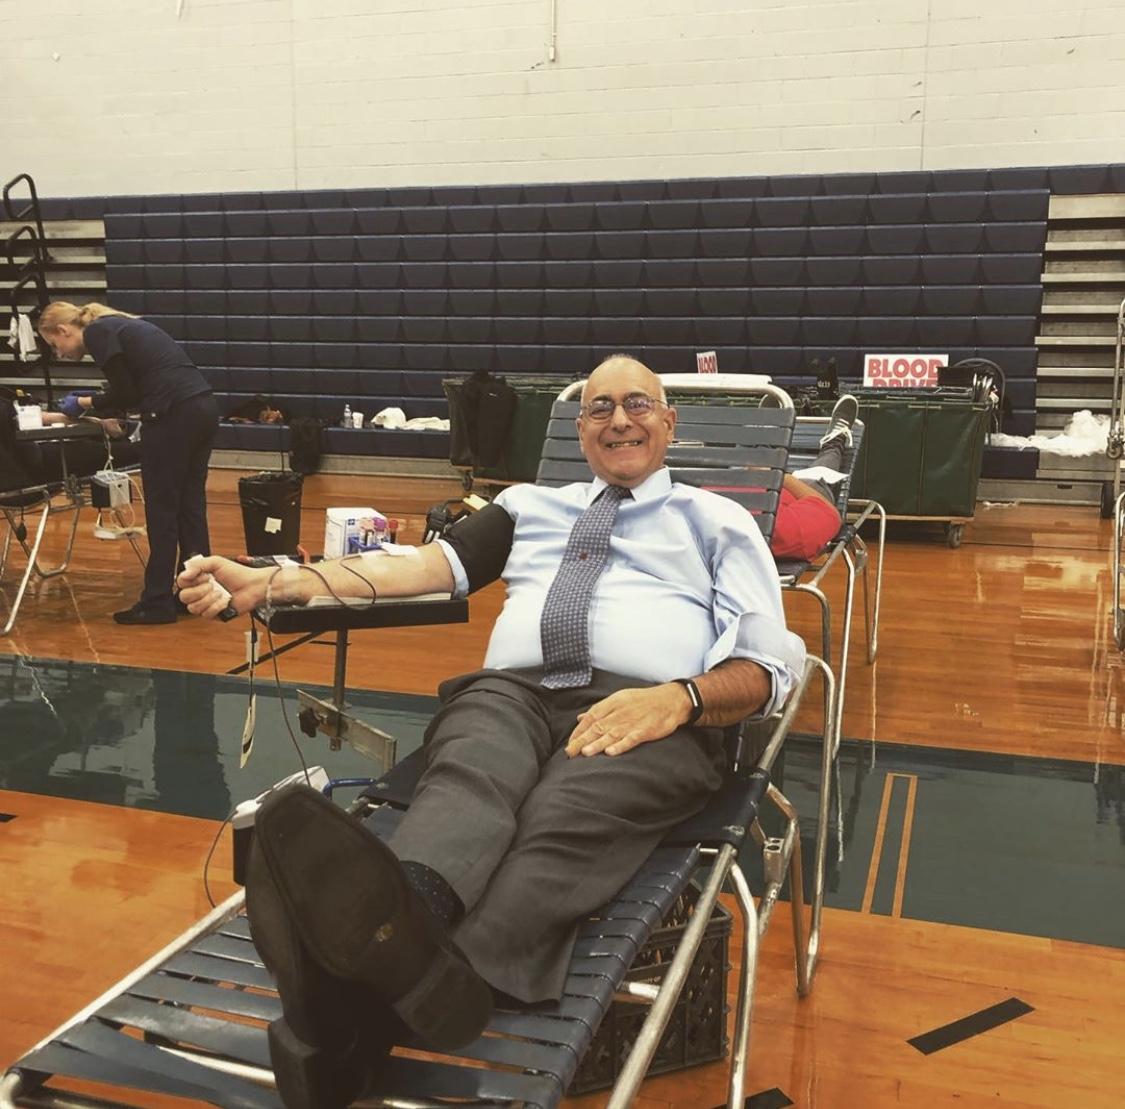 anthony dragona giving blood and smiling